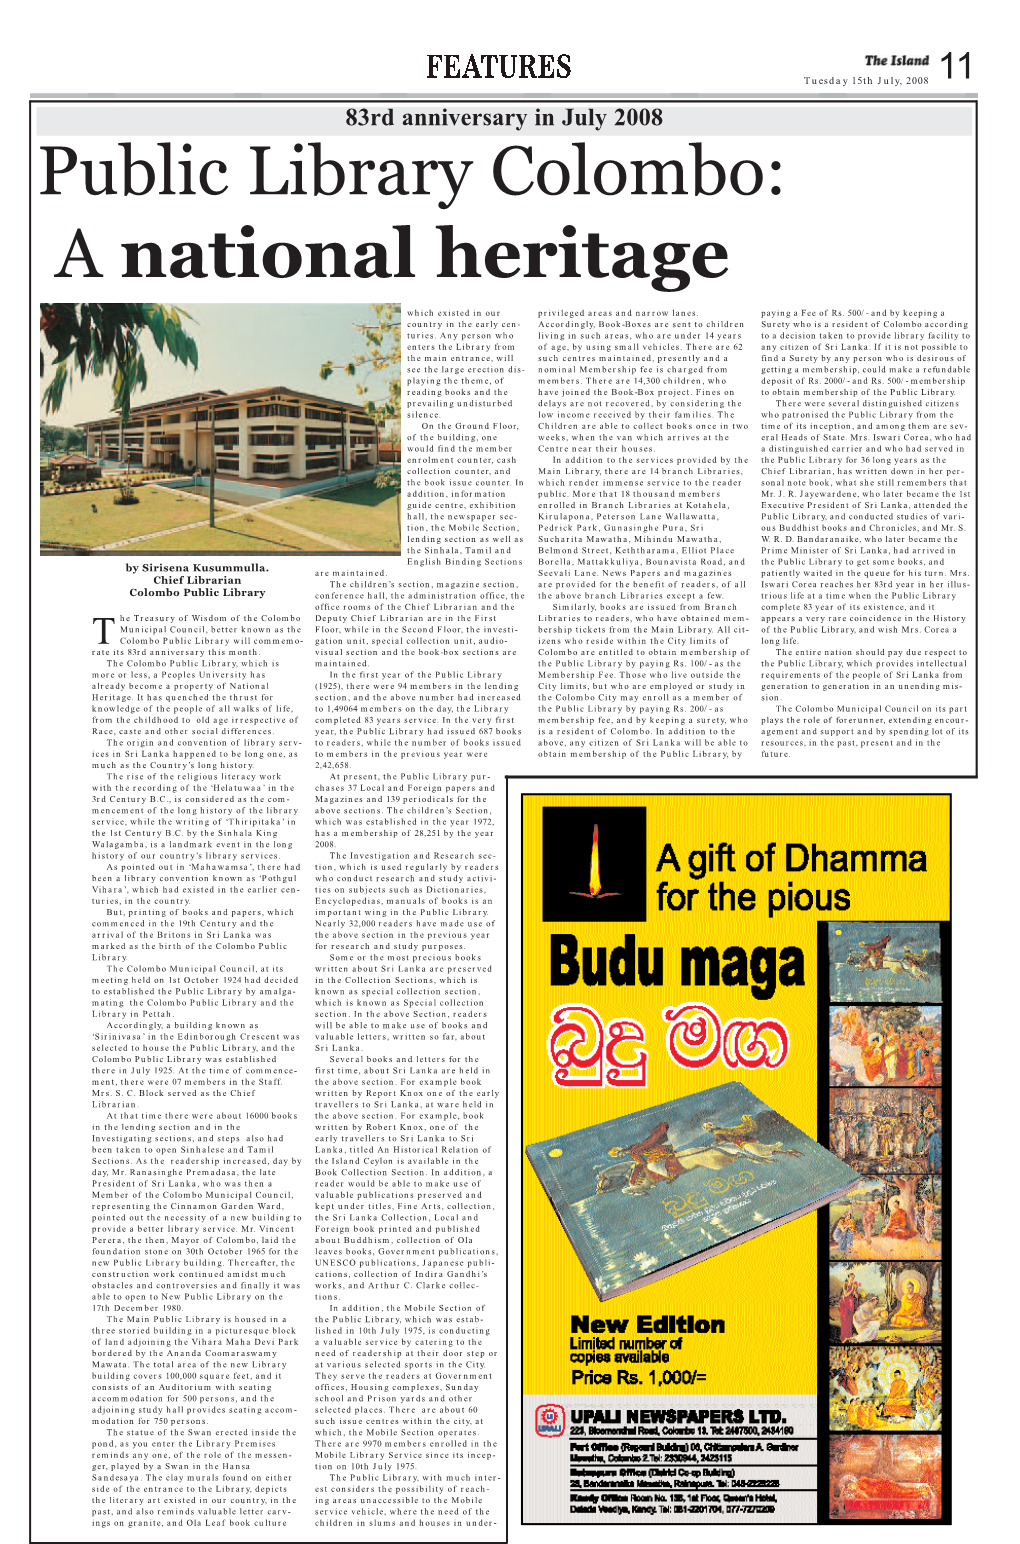 Public Library Colombo: a National Heritage